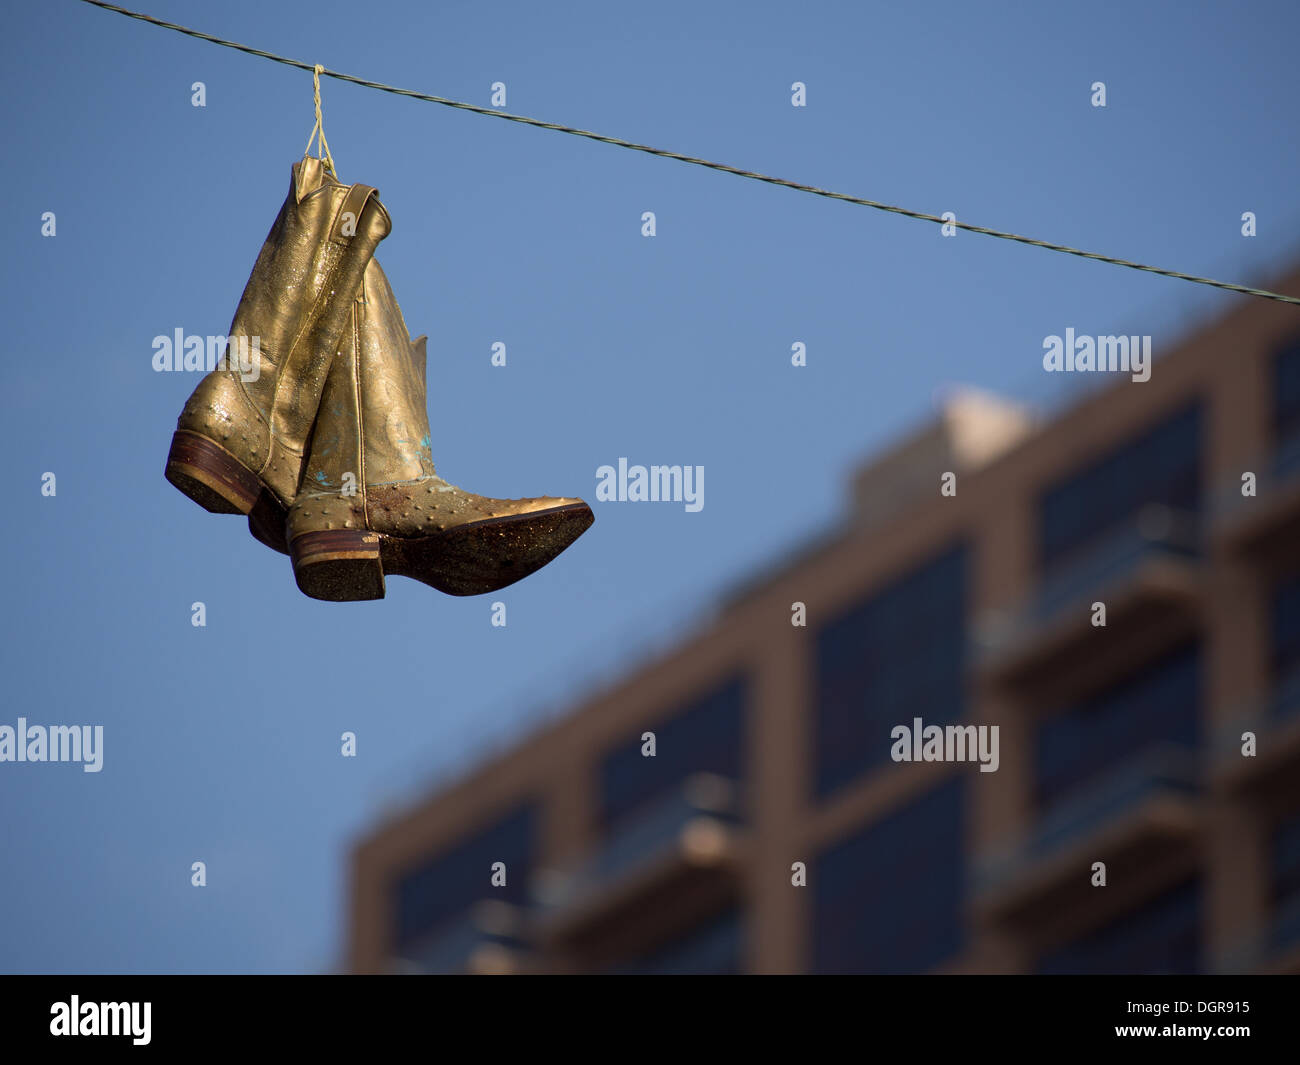 Golden cowboy boots hanging from an electrical wire in Austin, Texas Stock Photo